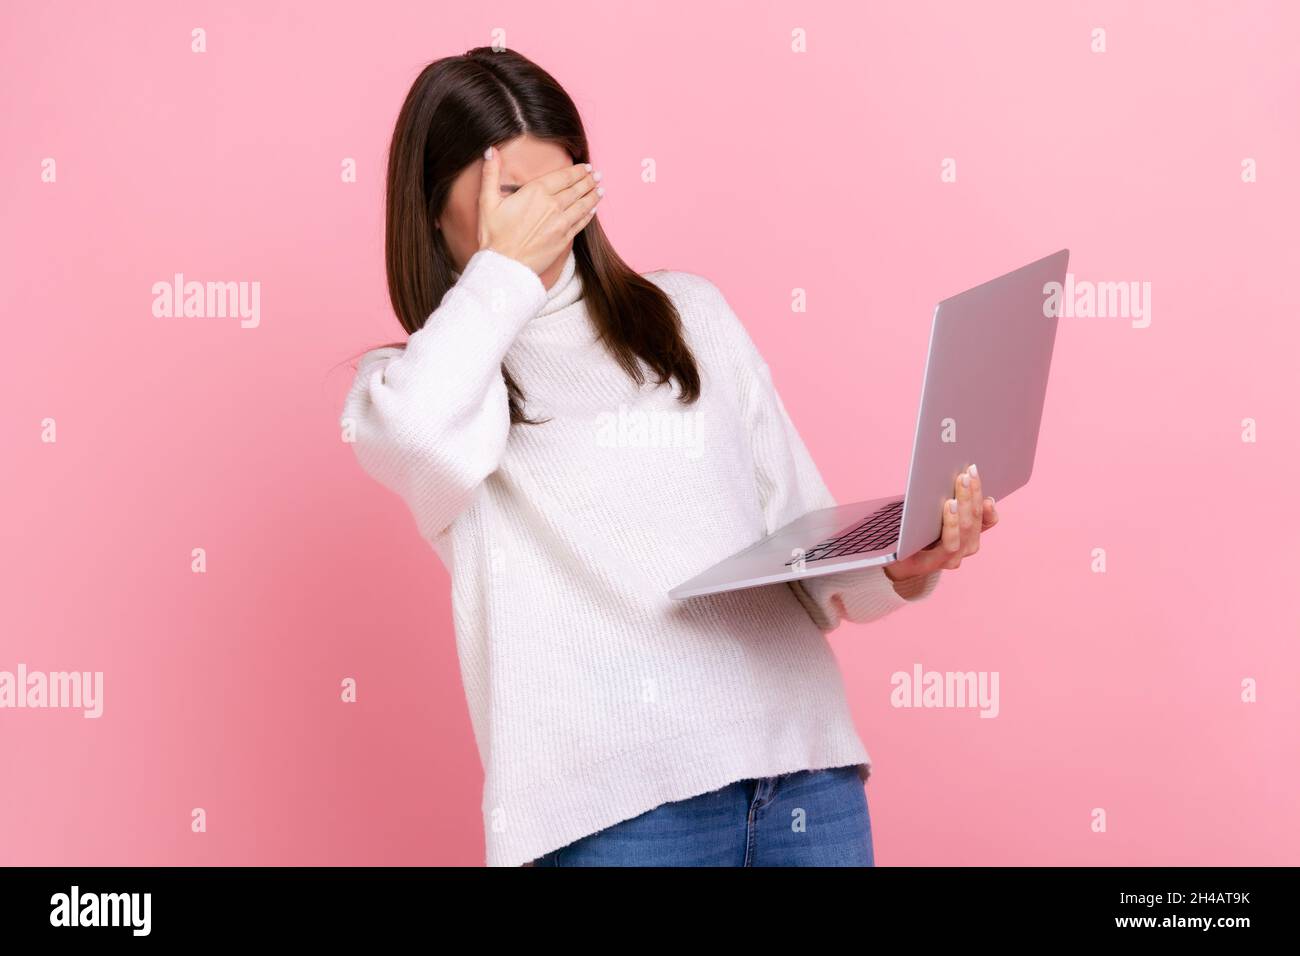 Portrait of brunette female holding laptop computer, covering eyes with palm, sees disgust content, wearing white casual style sweater. Indoor studio shot isolated on pink background. Stock Photo